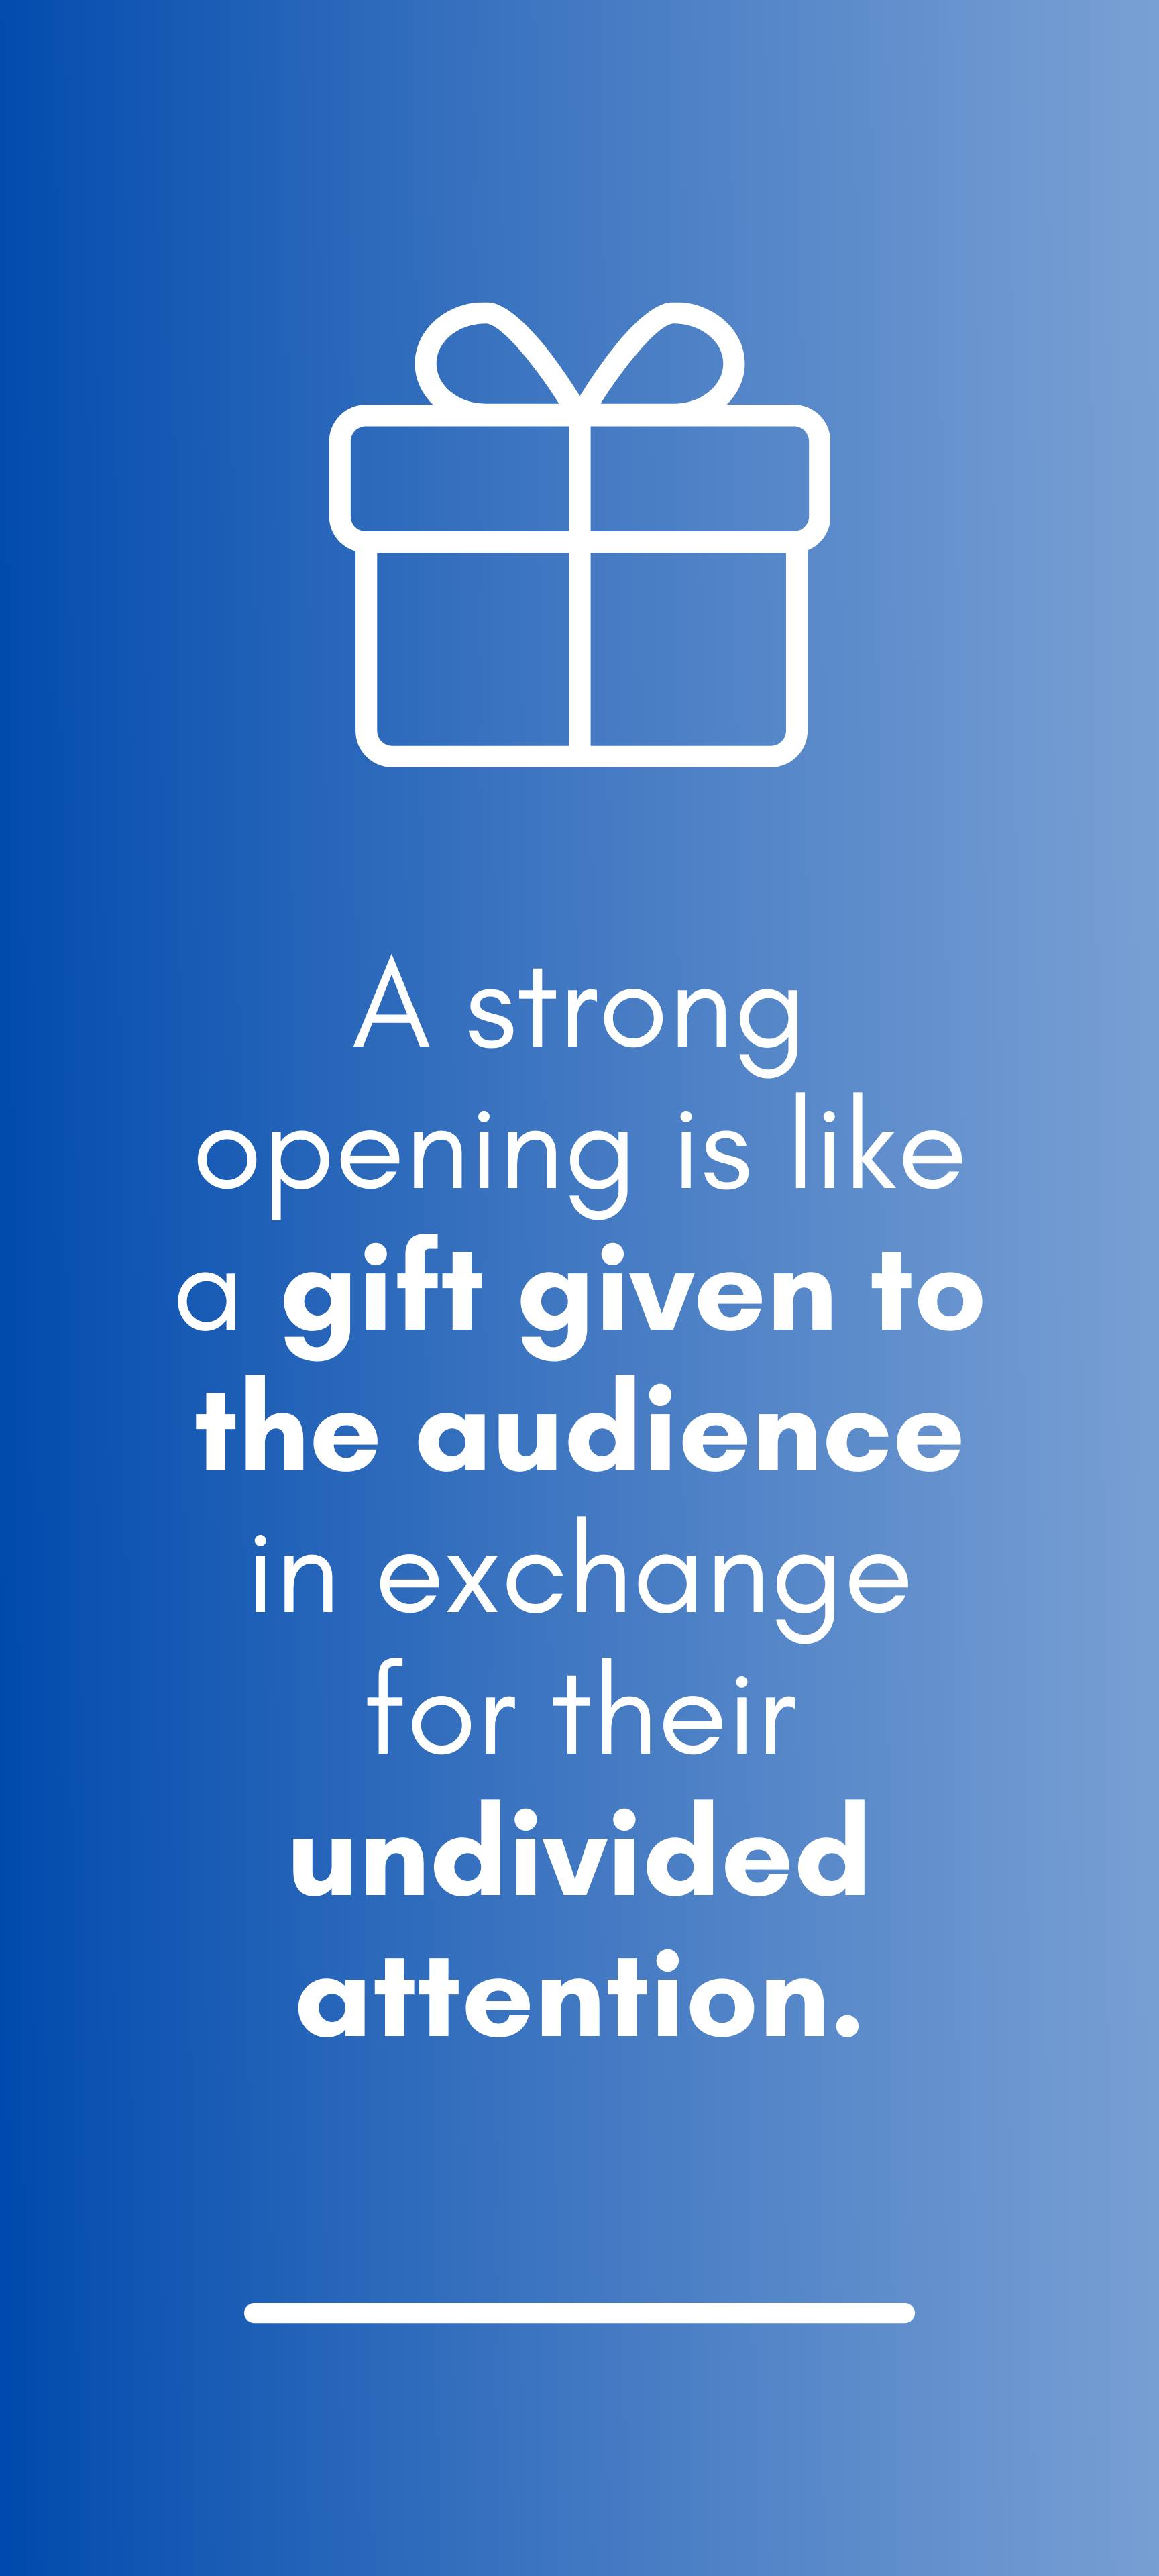 A strong opening is like a gift given to the audience in exchange for their undivided attention.